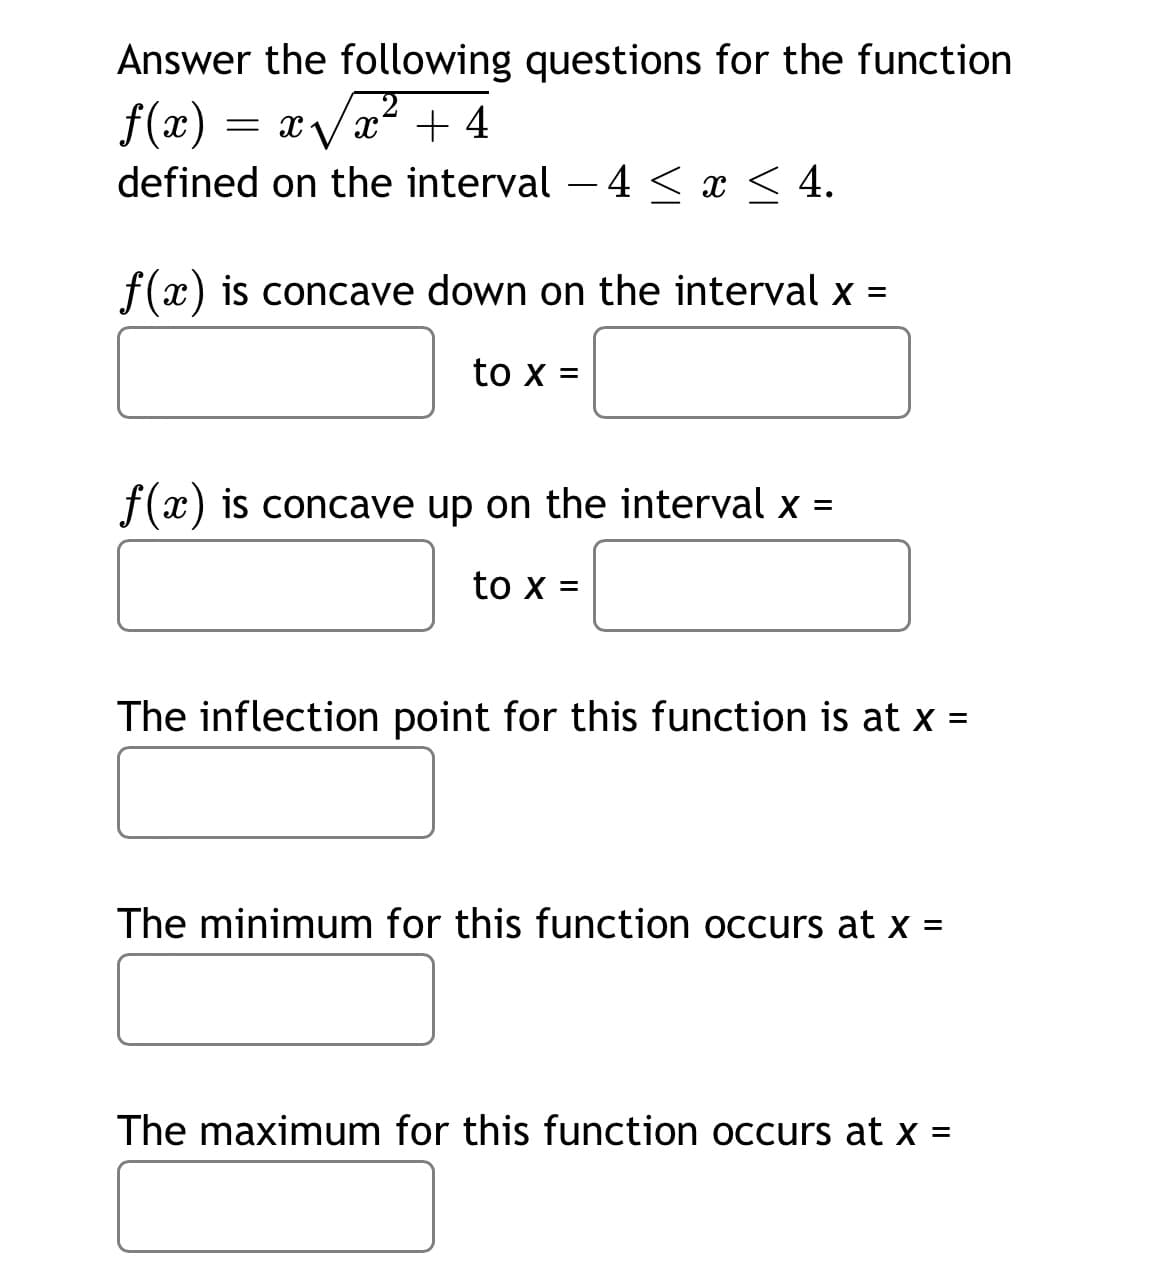 Answer the following questions for the function
f(x) = xVx+ 4
defined on the interval – 4 < x < 4.
f(x) is concave down on the interval x =
to x =
f(x) is concave up on the interval x =
to x =
The inflection point for this function is at x =
The minimum for this function occurs at x =
The maximum for this function occurs at x =
%3D
